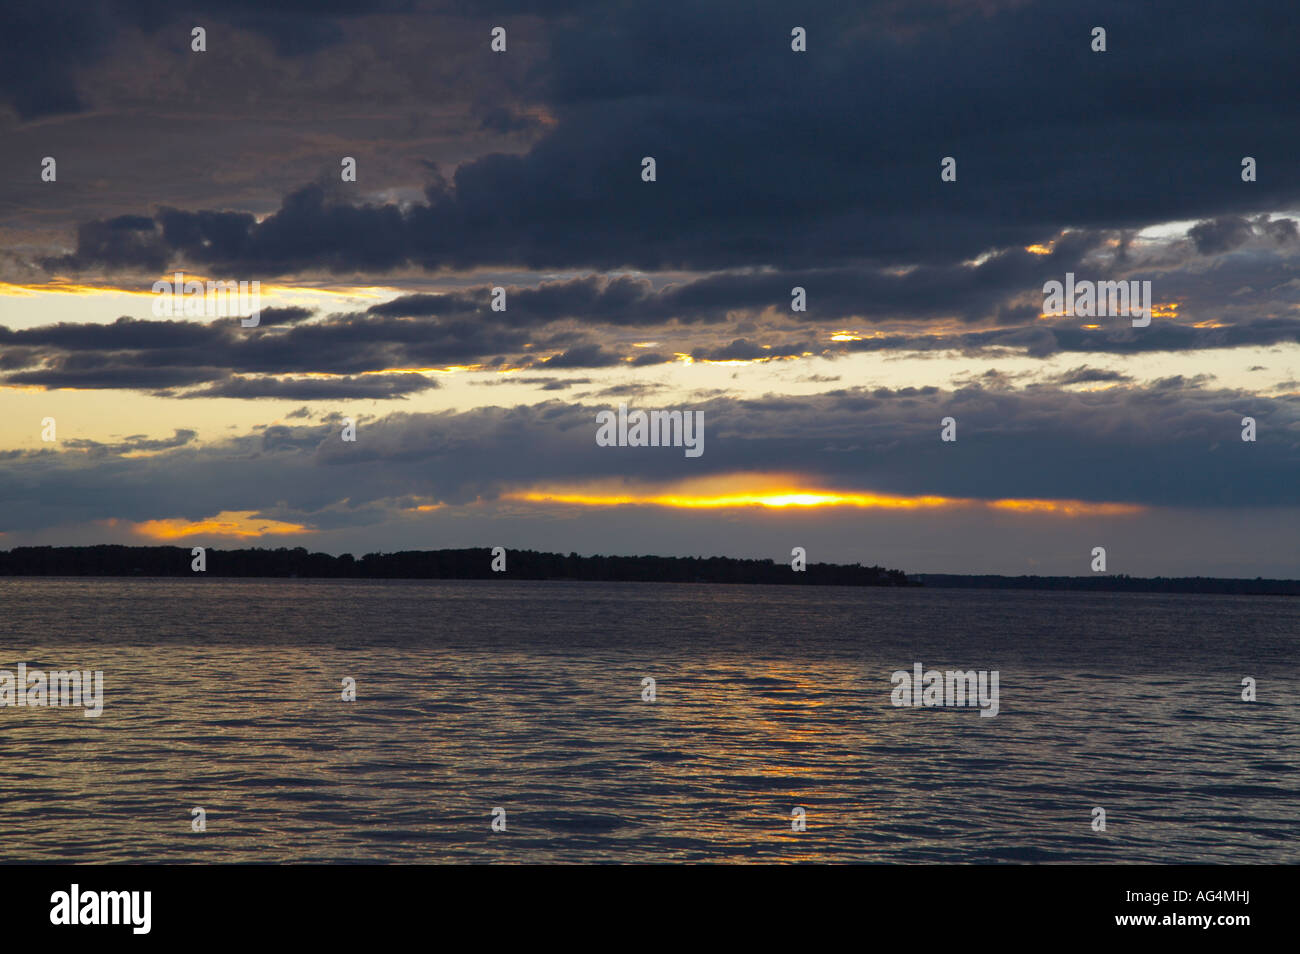 Sunset over the St Lawrence River in the Thousand Islands St Lawrence Seaway region of New York State Stock Photo